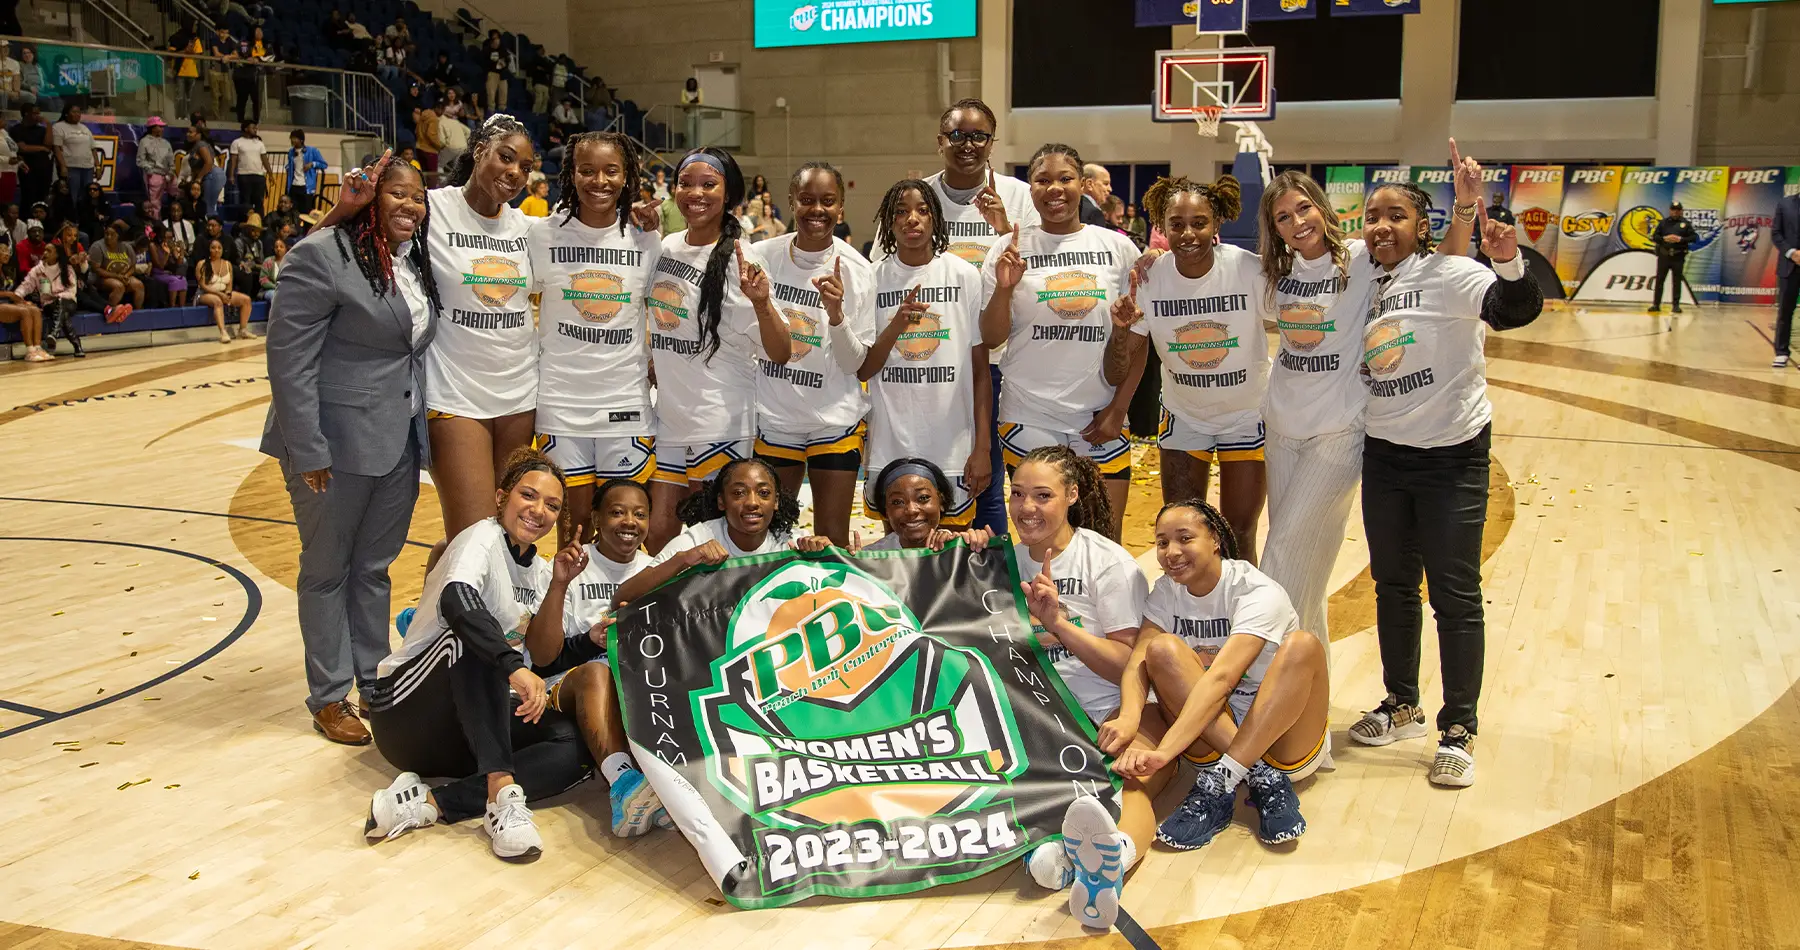 Women's Basketball team with PBC trophy